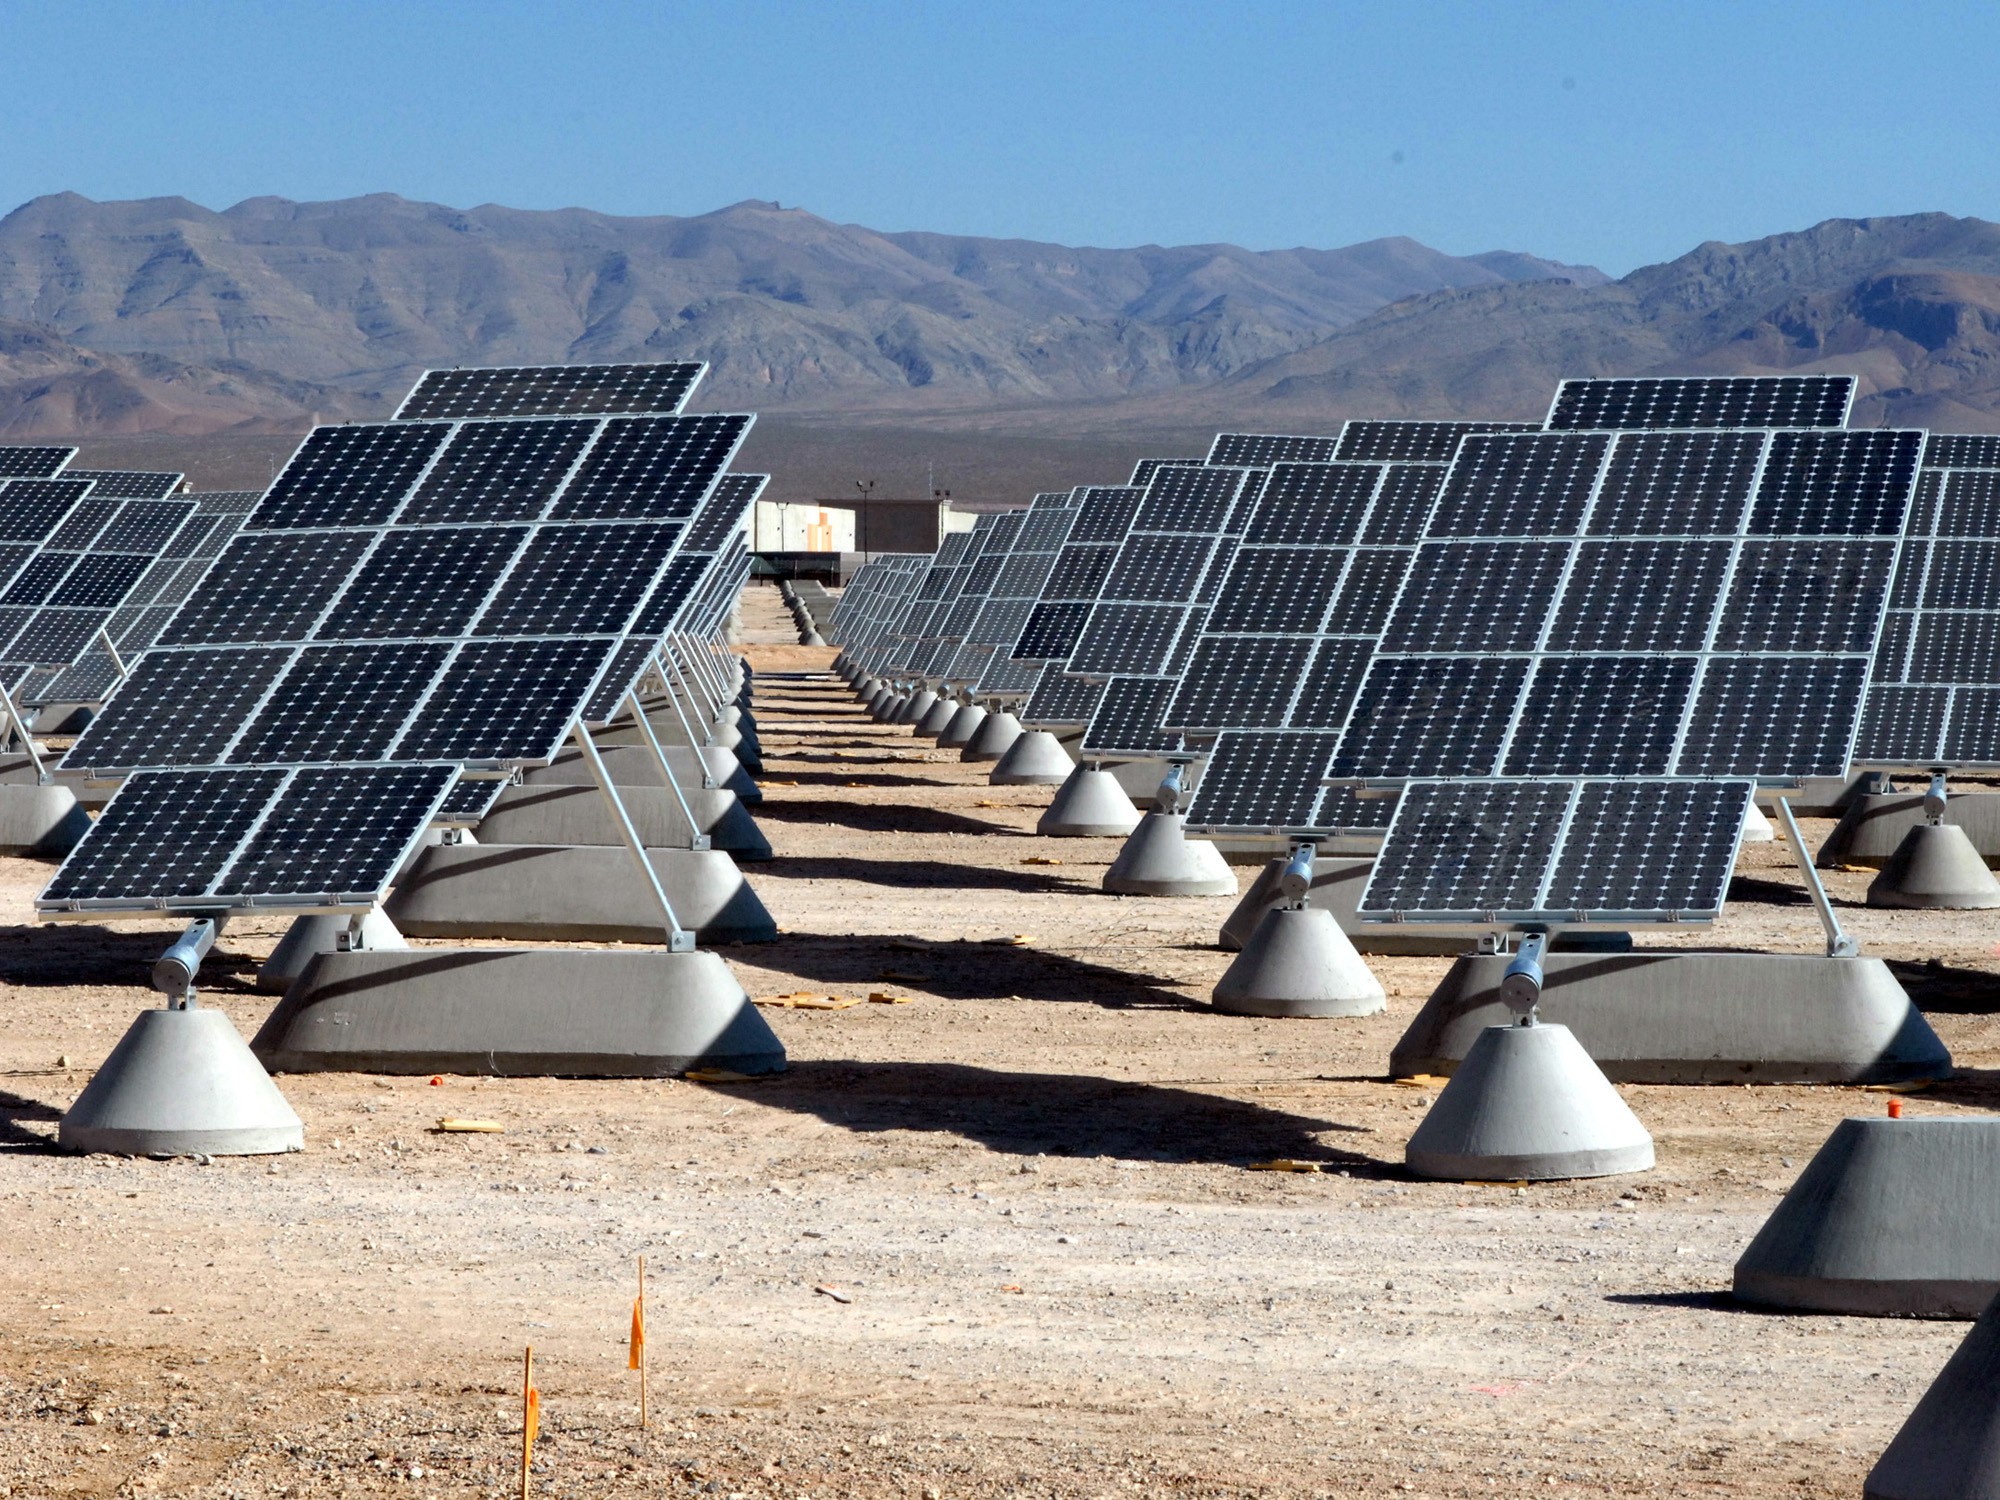 blm-sets-aside-21-000-acres-near-yuma-for-possible-solar-project